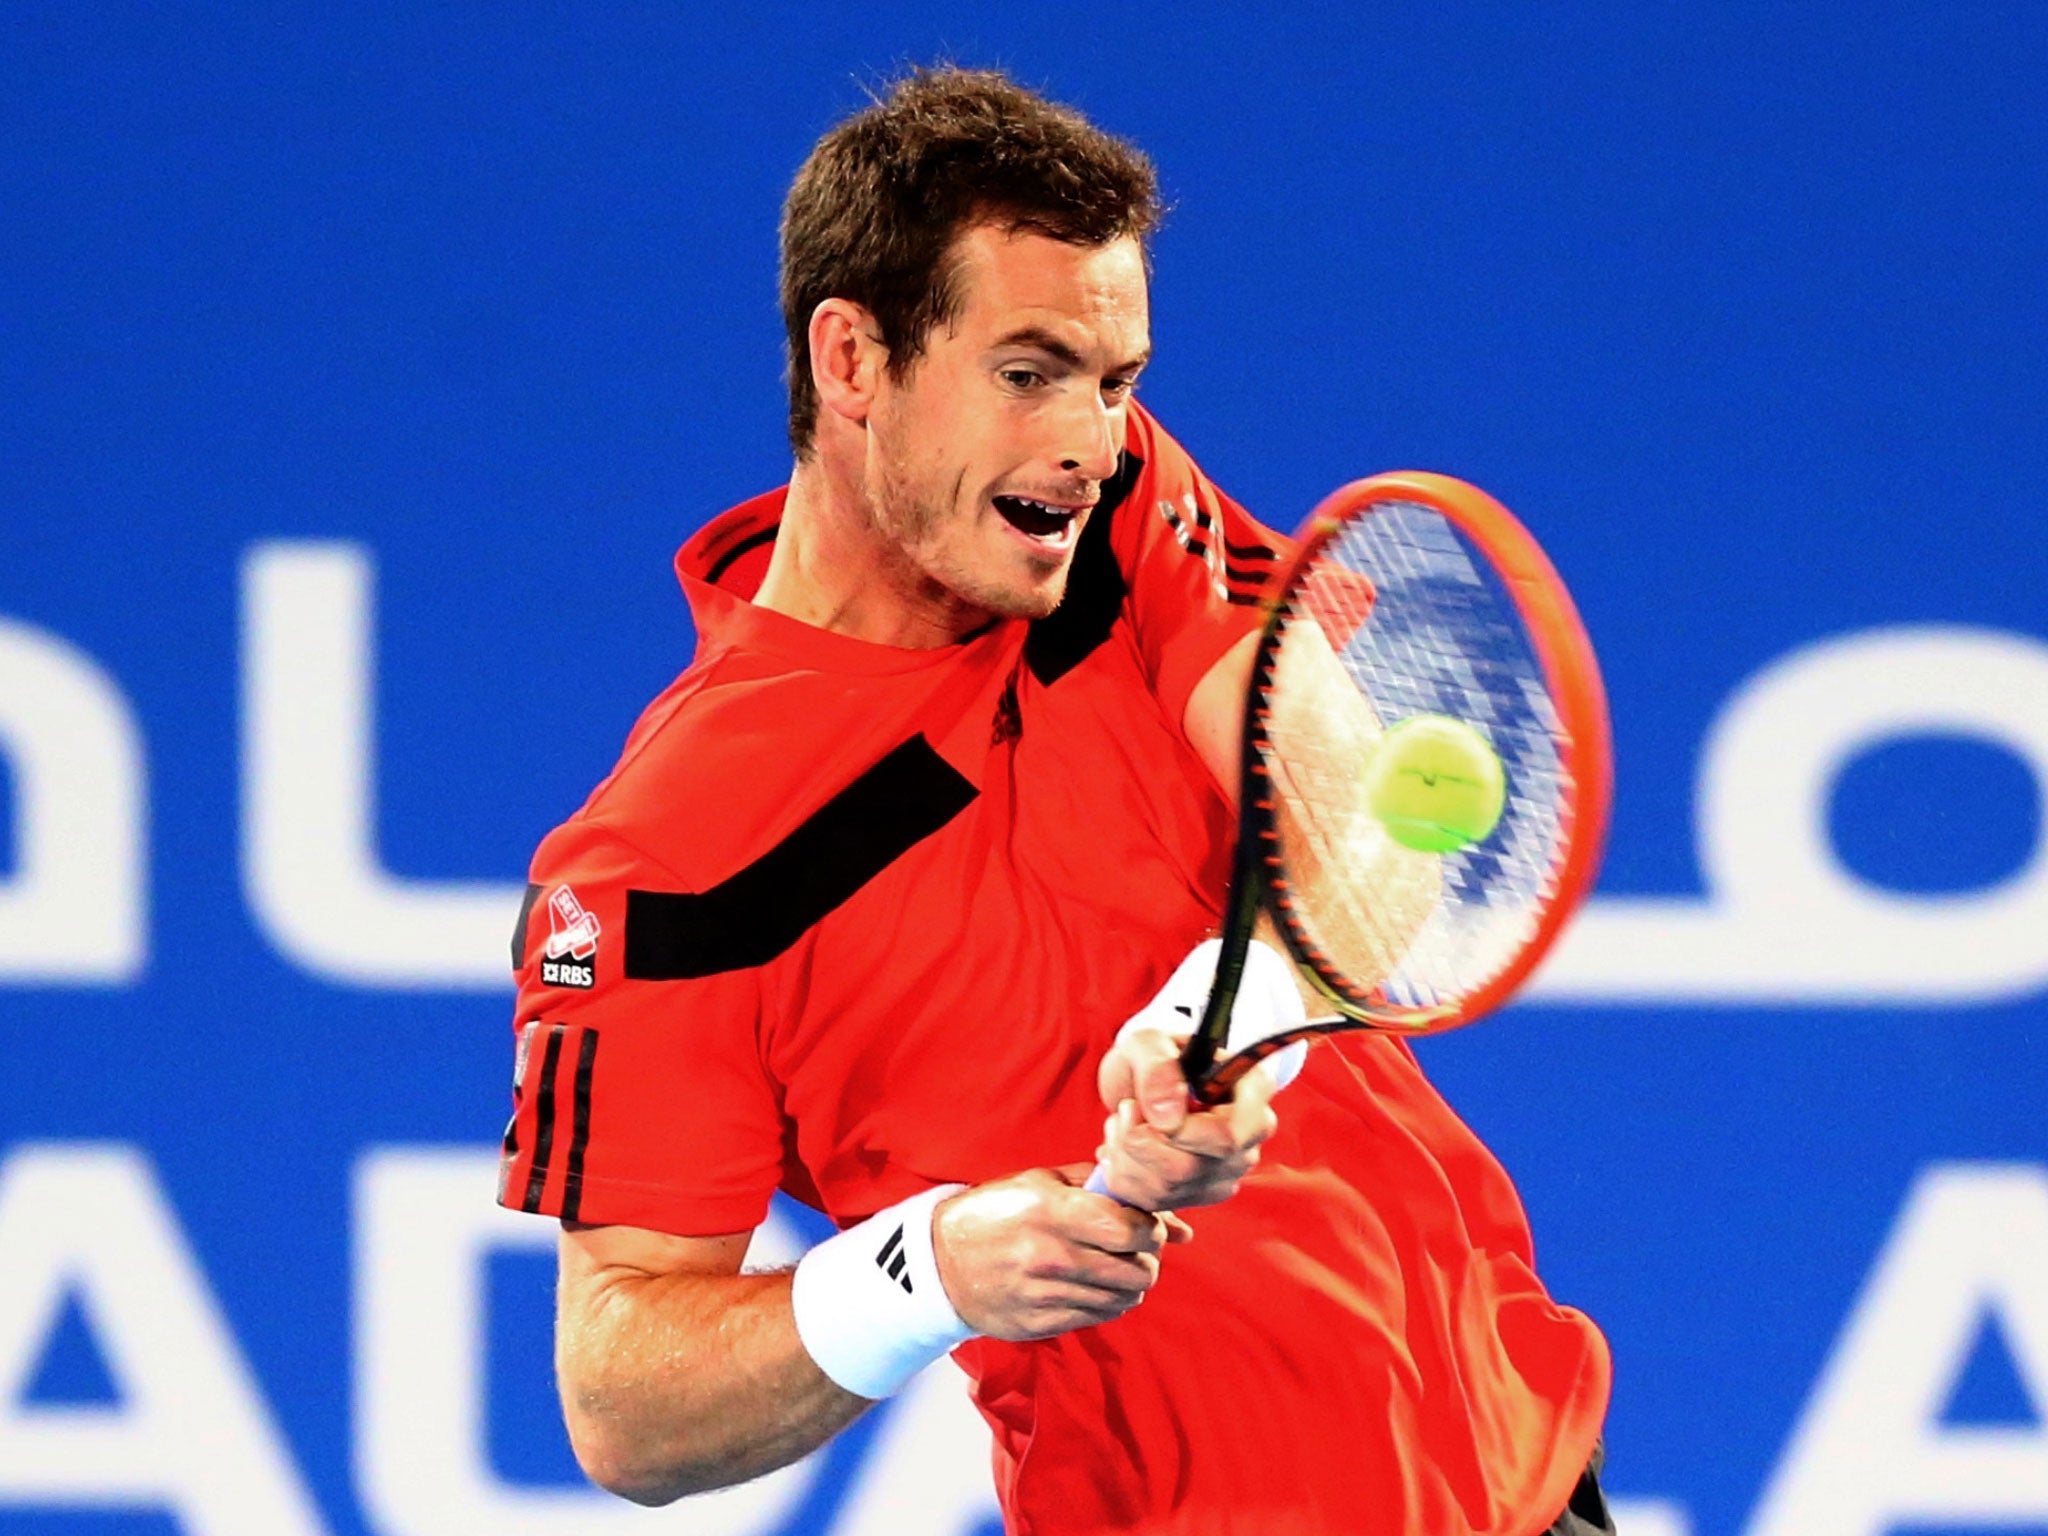 Andy Murray says the true test of his back will be when he meets the leading players